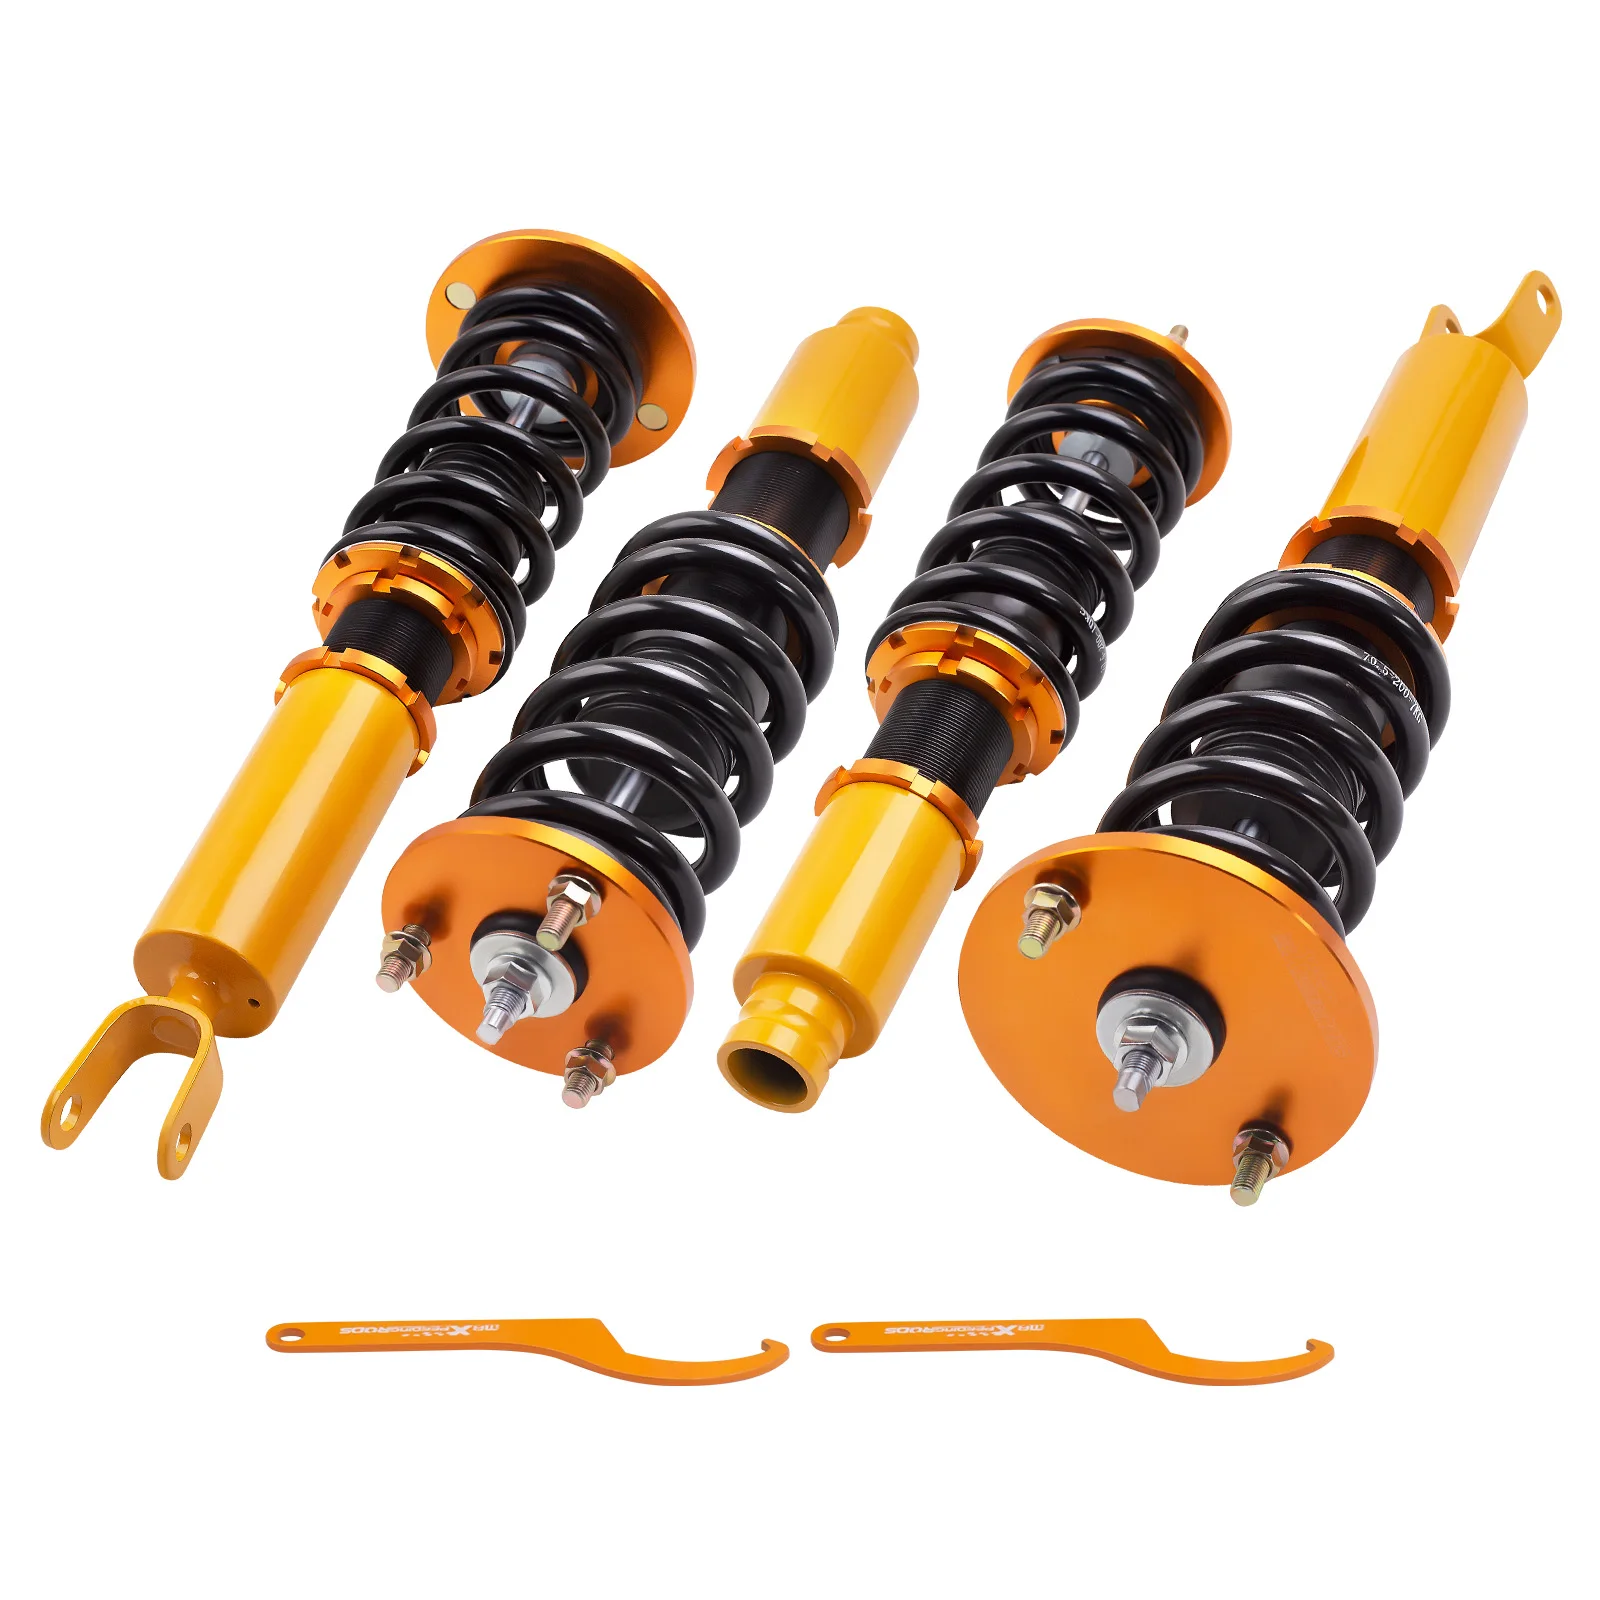 

Coilover Suspension Lowering Kits for HONDA ACCORD 90-97 EX/LX/DX/SE Shock Absorbers Adjustable Height Coilover Spring